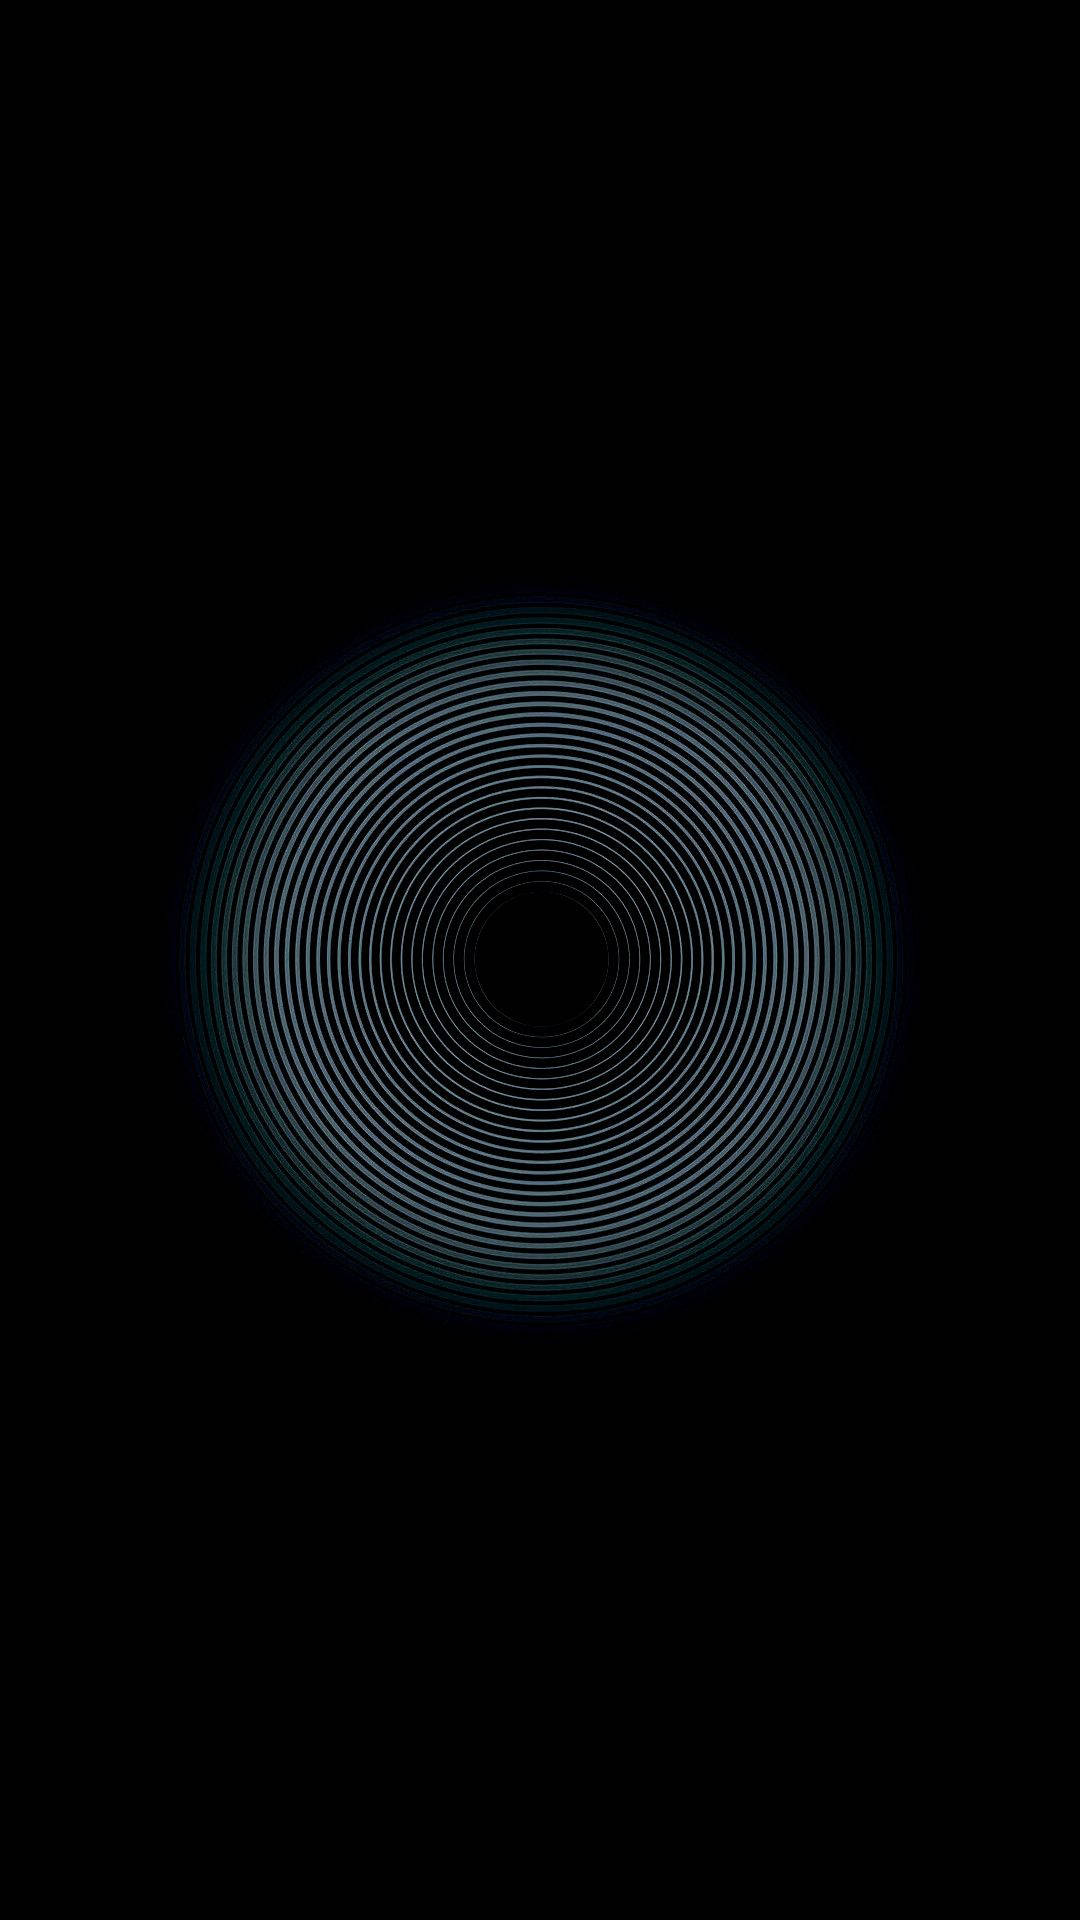 Solid Black 4k Glowing Circles Background